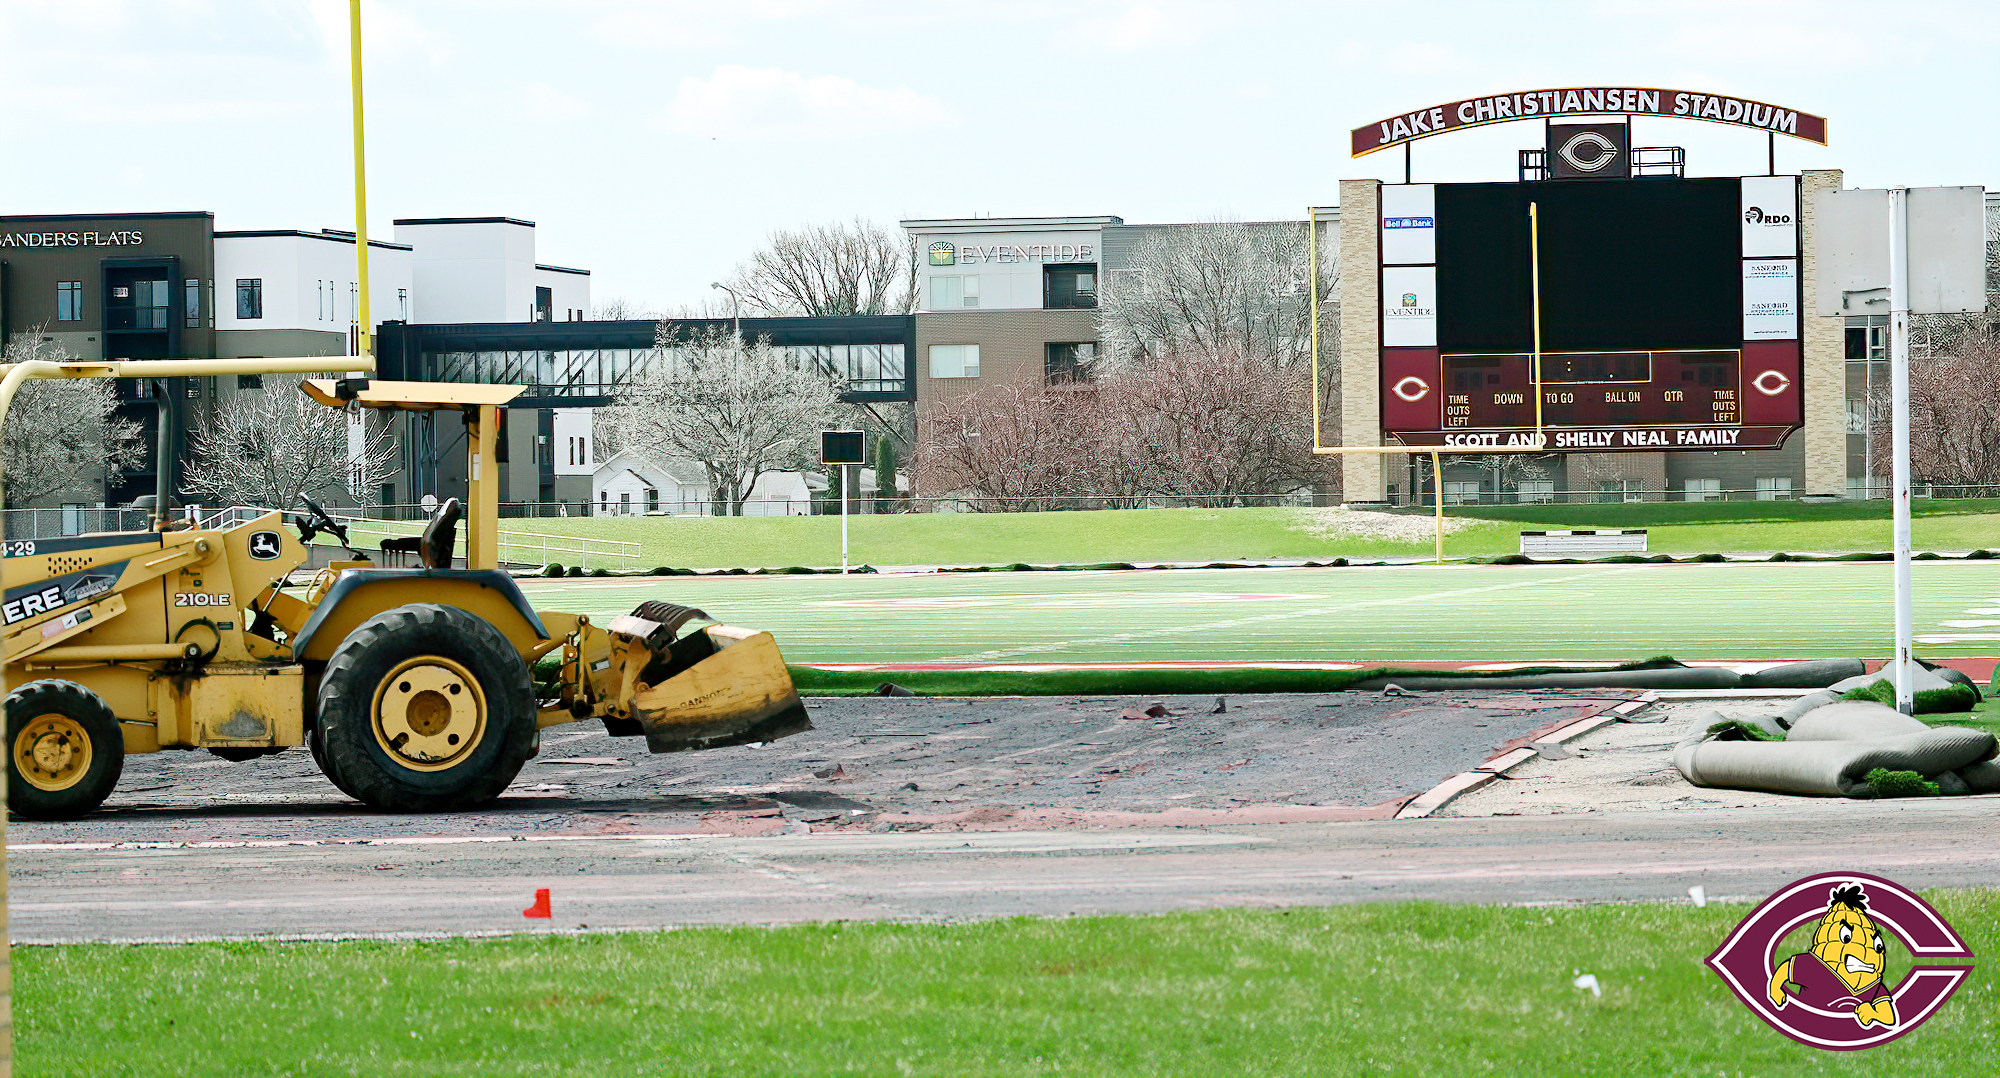 In partnership with The Fargo-Moorhead Convention and Visitors Bureau and Oak Grove Lutheran School, the $ 2.8 million track & turf project has begun.